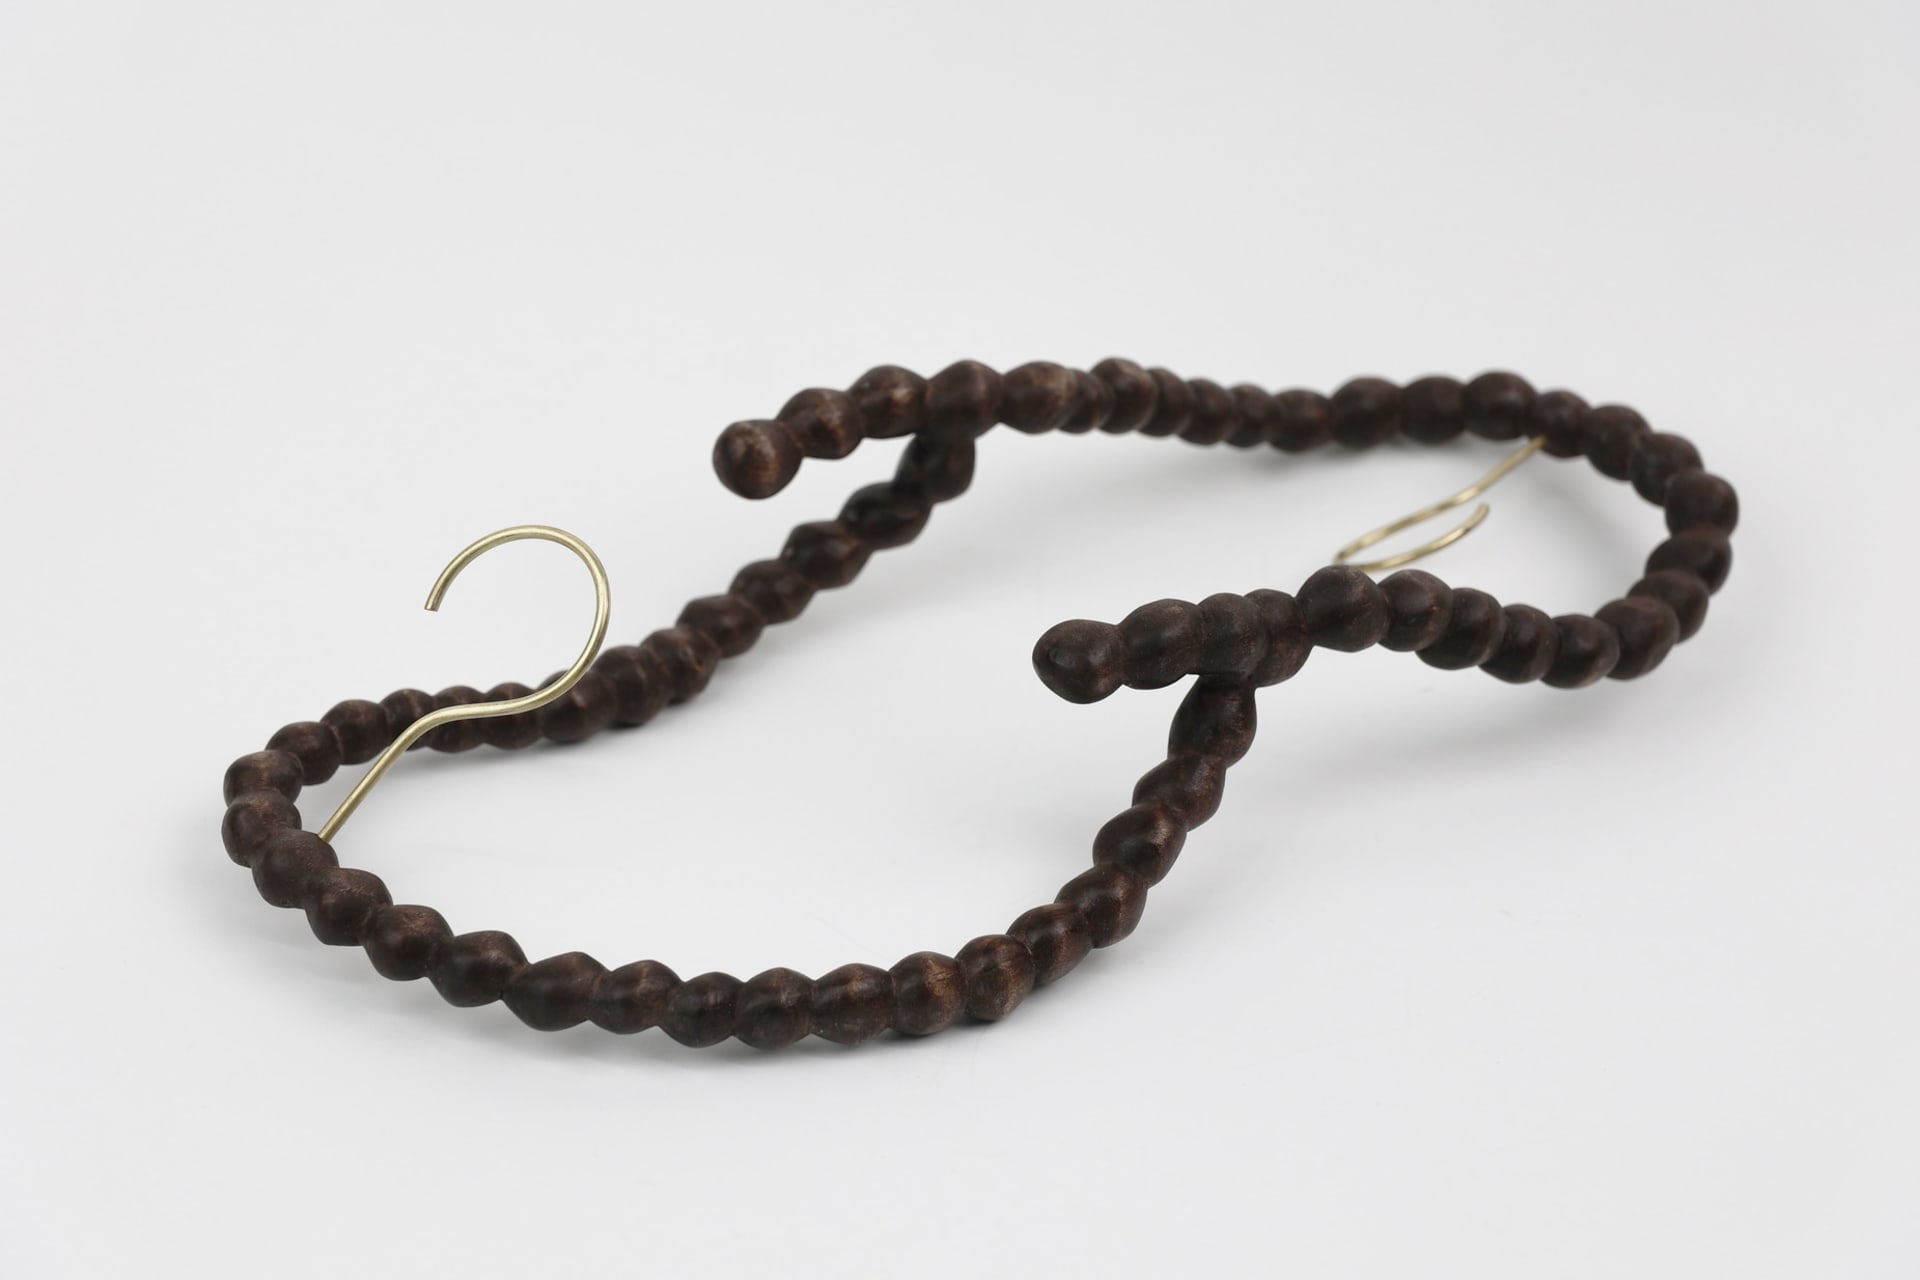 Two strings of wood-carved pearls connected to each other with two hooks in the middle of each string representing the hangers.